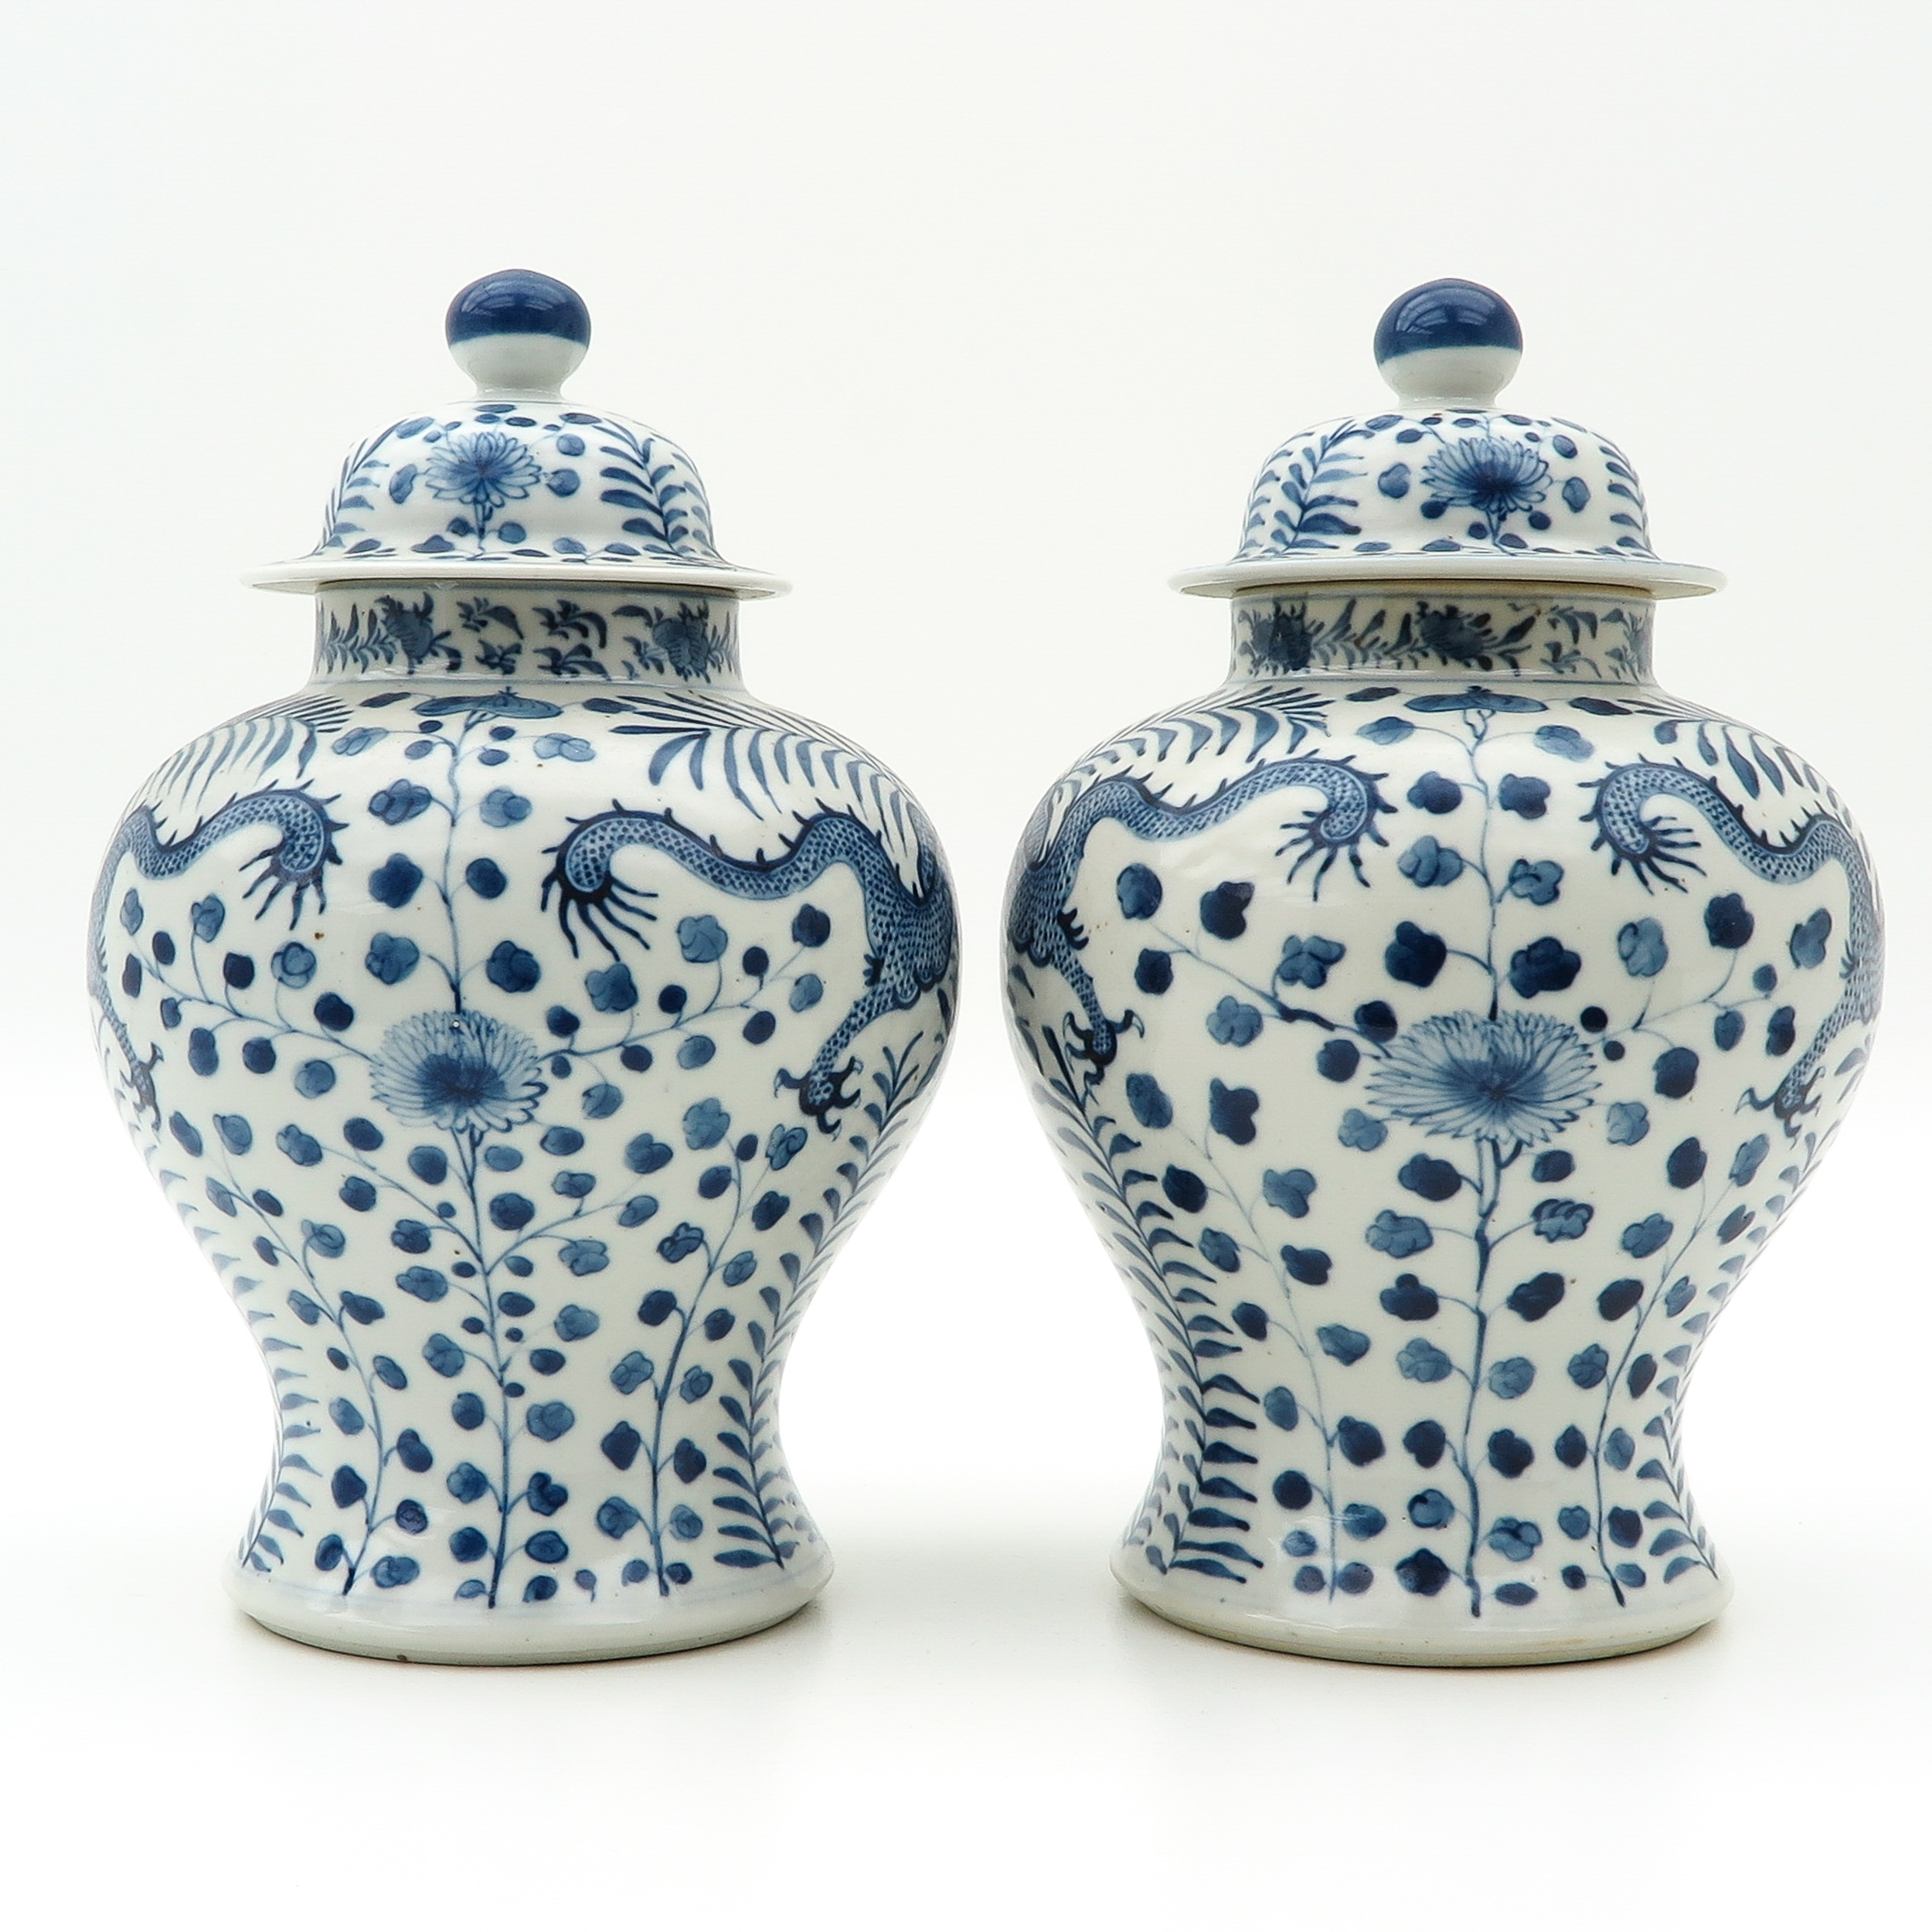 A Pair of Temple Jars with Covers - Image 3 of 9